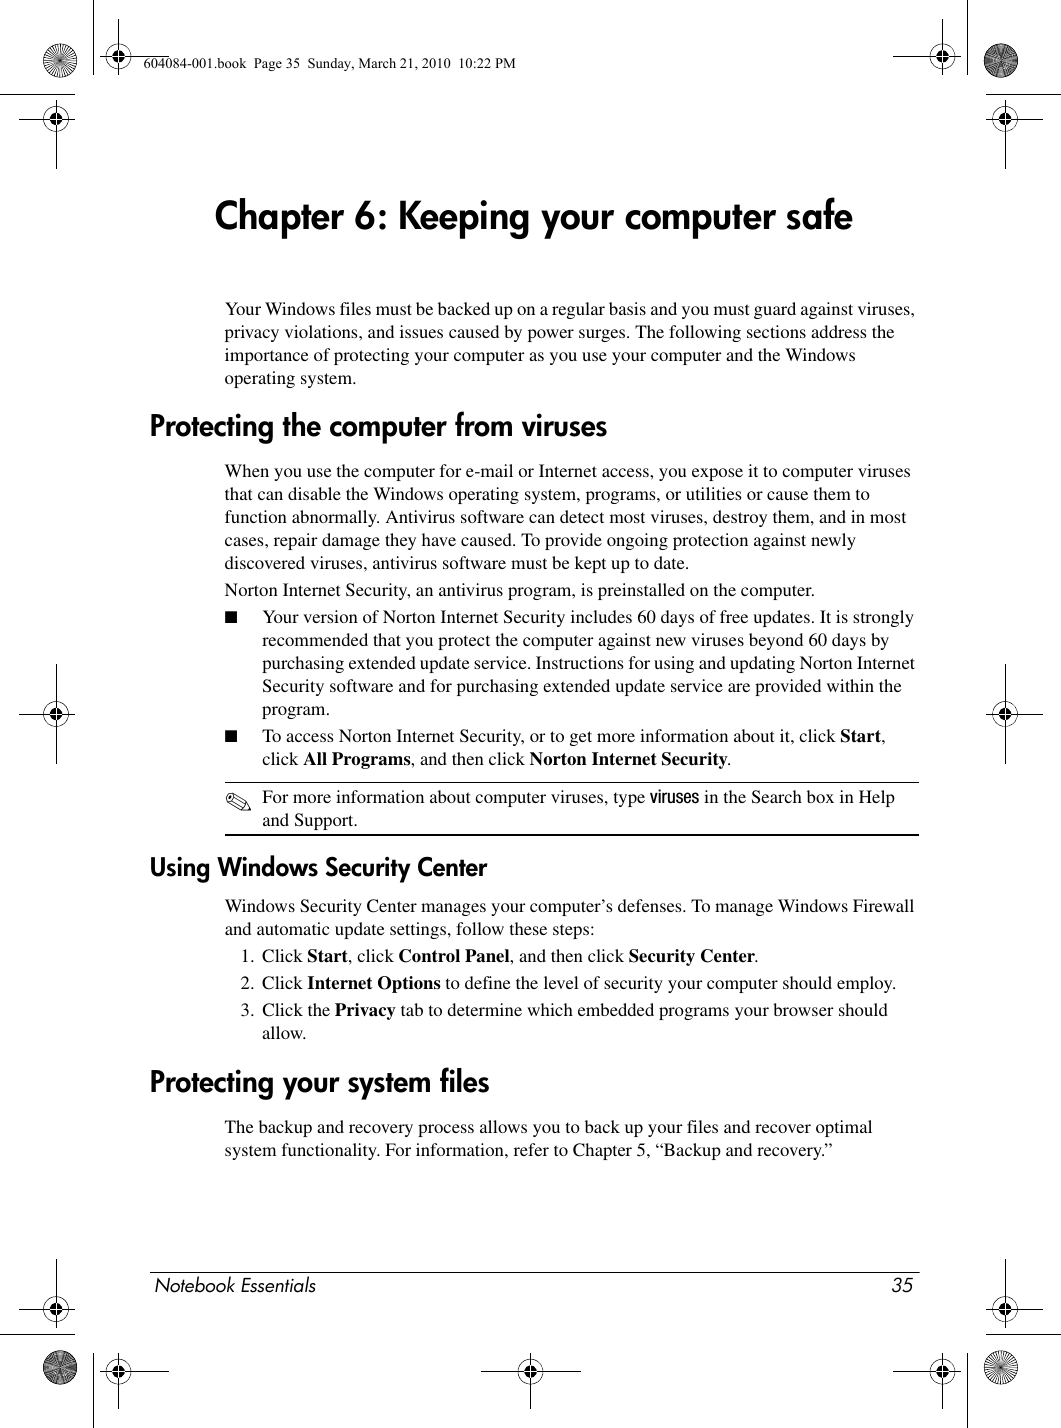 Notebook Essentials 35Chapter 6: Keeping your computer safeYour Windows files must be backed up on a regular basis and you must guard against viruses, privacy violations, and issues caused by power surges. The following sections address the importance of protecting your computer as you use your computer and the Windows operating system.When you use the computer for e-mail or Internet access, you expose it to computer viruses that can disable the Windows operating system, programs, or utilities or cause them to function abnormally. Antivirus software can detect most viruses, destroy them, and in most cases, repair damage they have caused. To provide ongoing protection against newly discovered viruses, antivirus software must be kept up to date.Norton Internet Security, an antivirus program, is preinstalled on the computer.■Your version of Norton Internet Security includes 60 days of free updates. It is strongly recommended that you protect the computer against new viruses beyond 60 days by purchasing extended update service. Instructions for using and updating Norton Internet Security software and for purchasing extended update service are provided within the program.■To access Norton Internet Security, or to get more information about it, click Start, click All Programs, and then click Norton Internet Security.✎For more information about computer viruses, type viruses in the Search box in Help and Support.Using Windows Security CenterWindows Security Center manages your computer’s defenses. To manage Windows Firewall and automatic update settings, follow these steps:1. Click Start, click Control Panel, and then click Security Center.2. Click Internet Options to define the level of security your computer should employ.3. Click the Privacy tab to determine which embedded programs your browser should allow.The backup and recovery process allows you to back up your files and recover optimal system functionality. For information, refer to Chapter 5, “Backup and recovery.”Protecting the computer from virusesProtecting your system files604084-001.book  Page 35  Sunday, March 21, 2010  10:22 PM